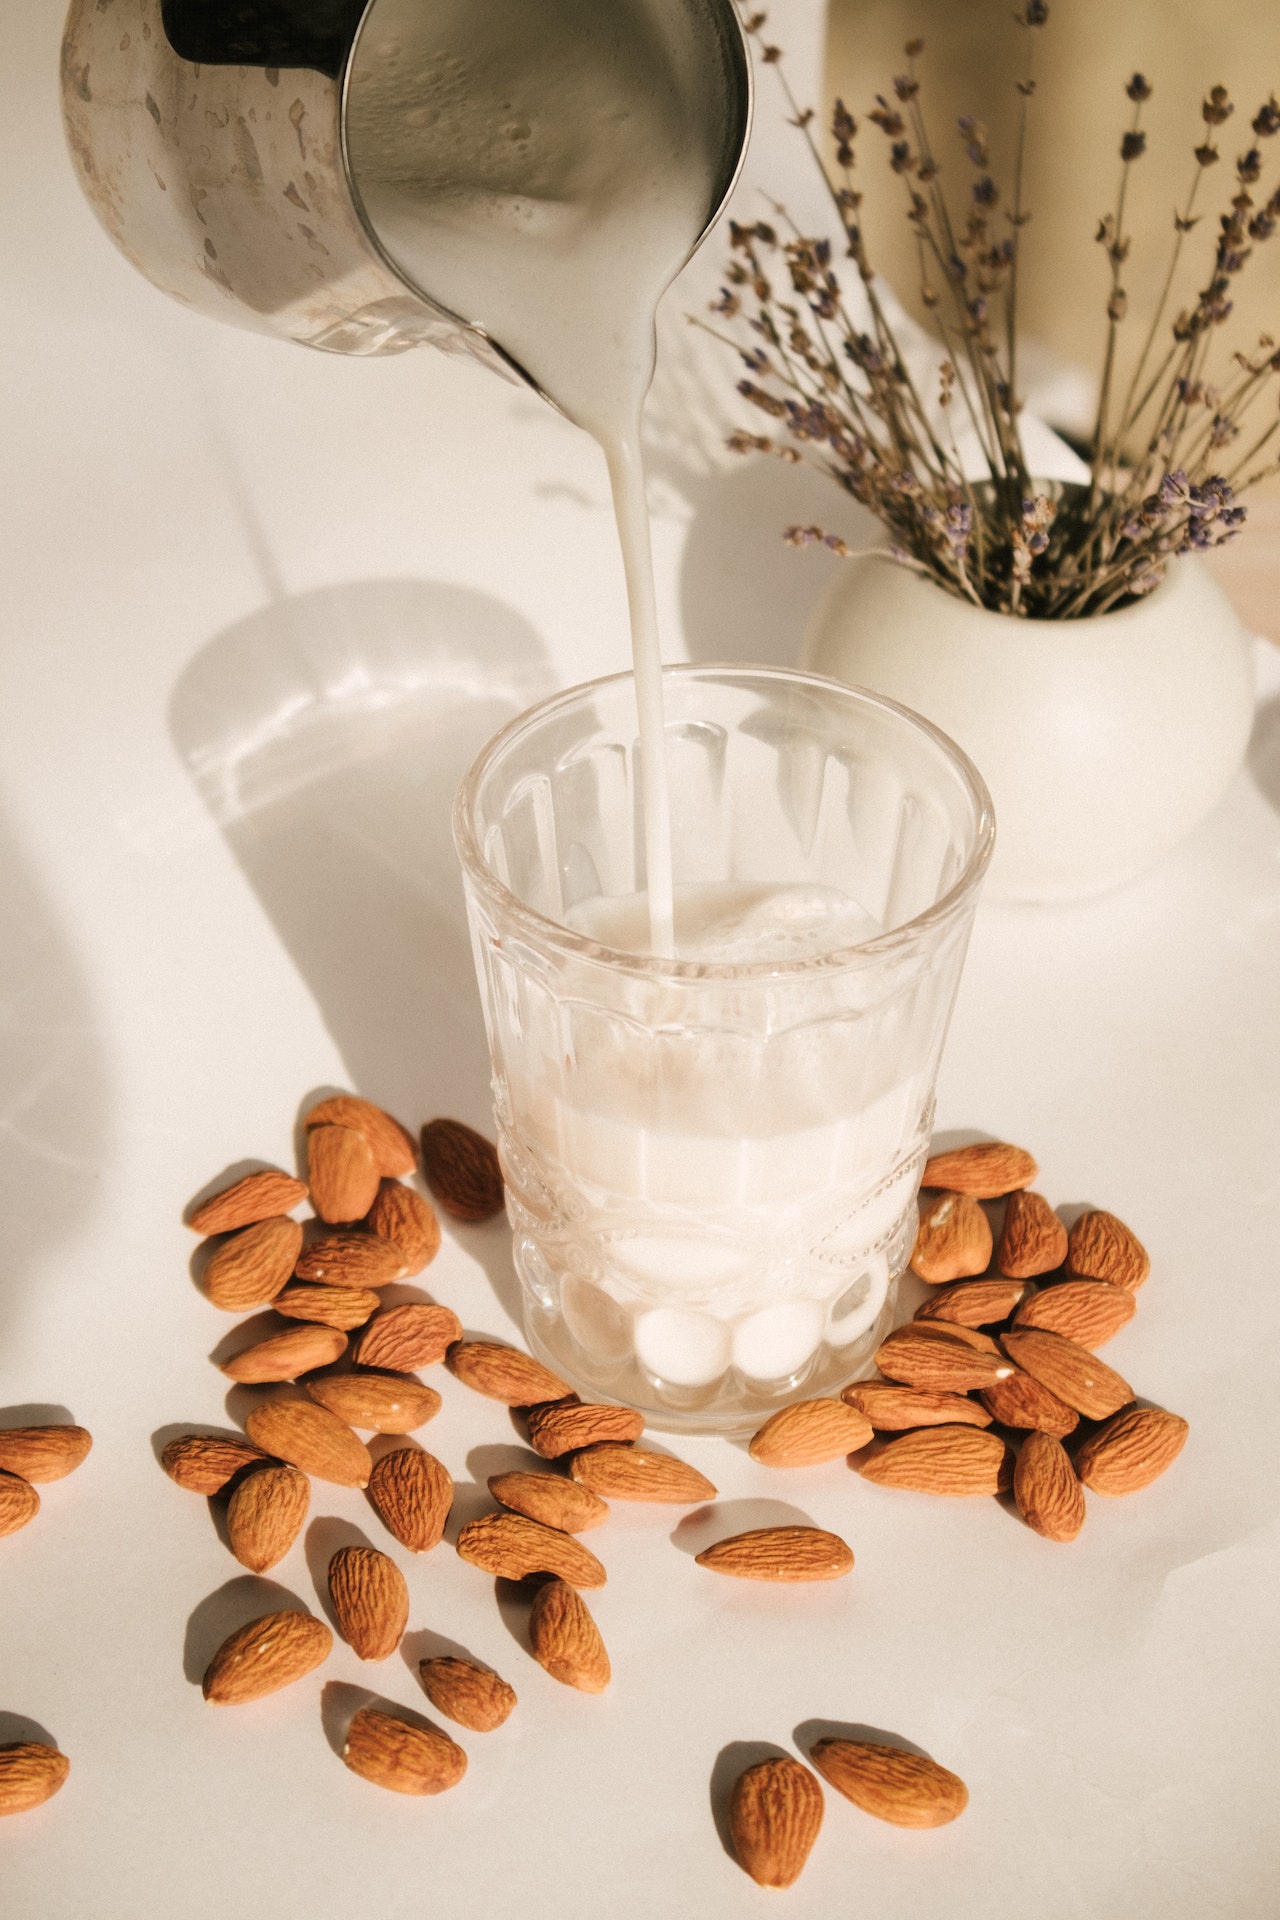 a glass of almond milk being poured surrounded by whole almonds.